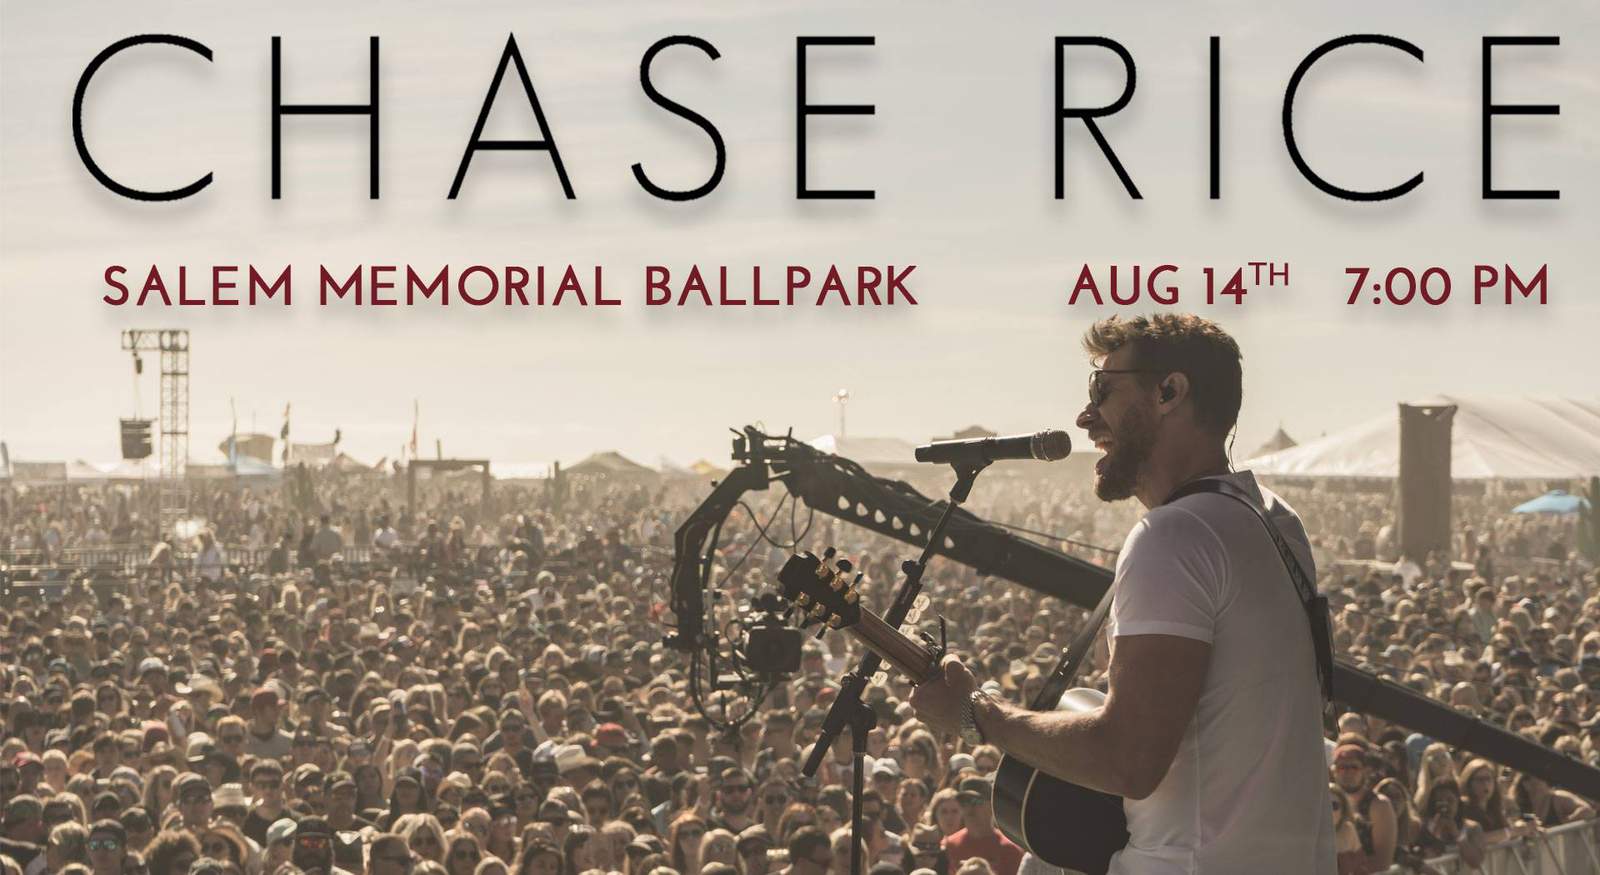 Chase Rice to perform at Salem Memorial Ballpark in August